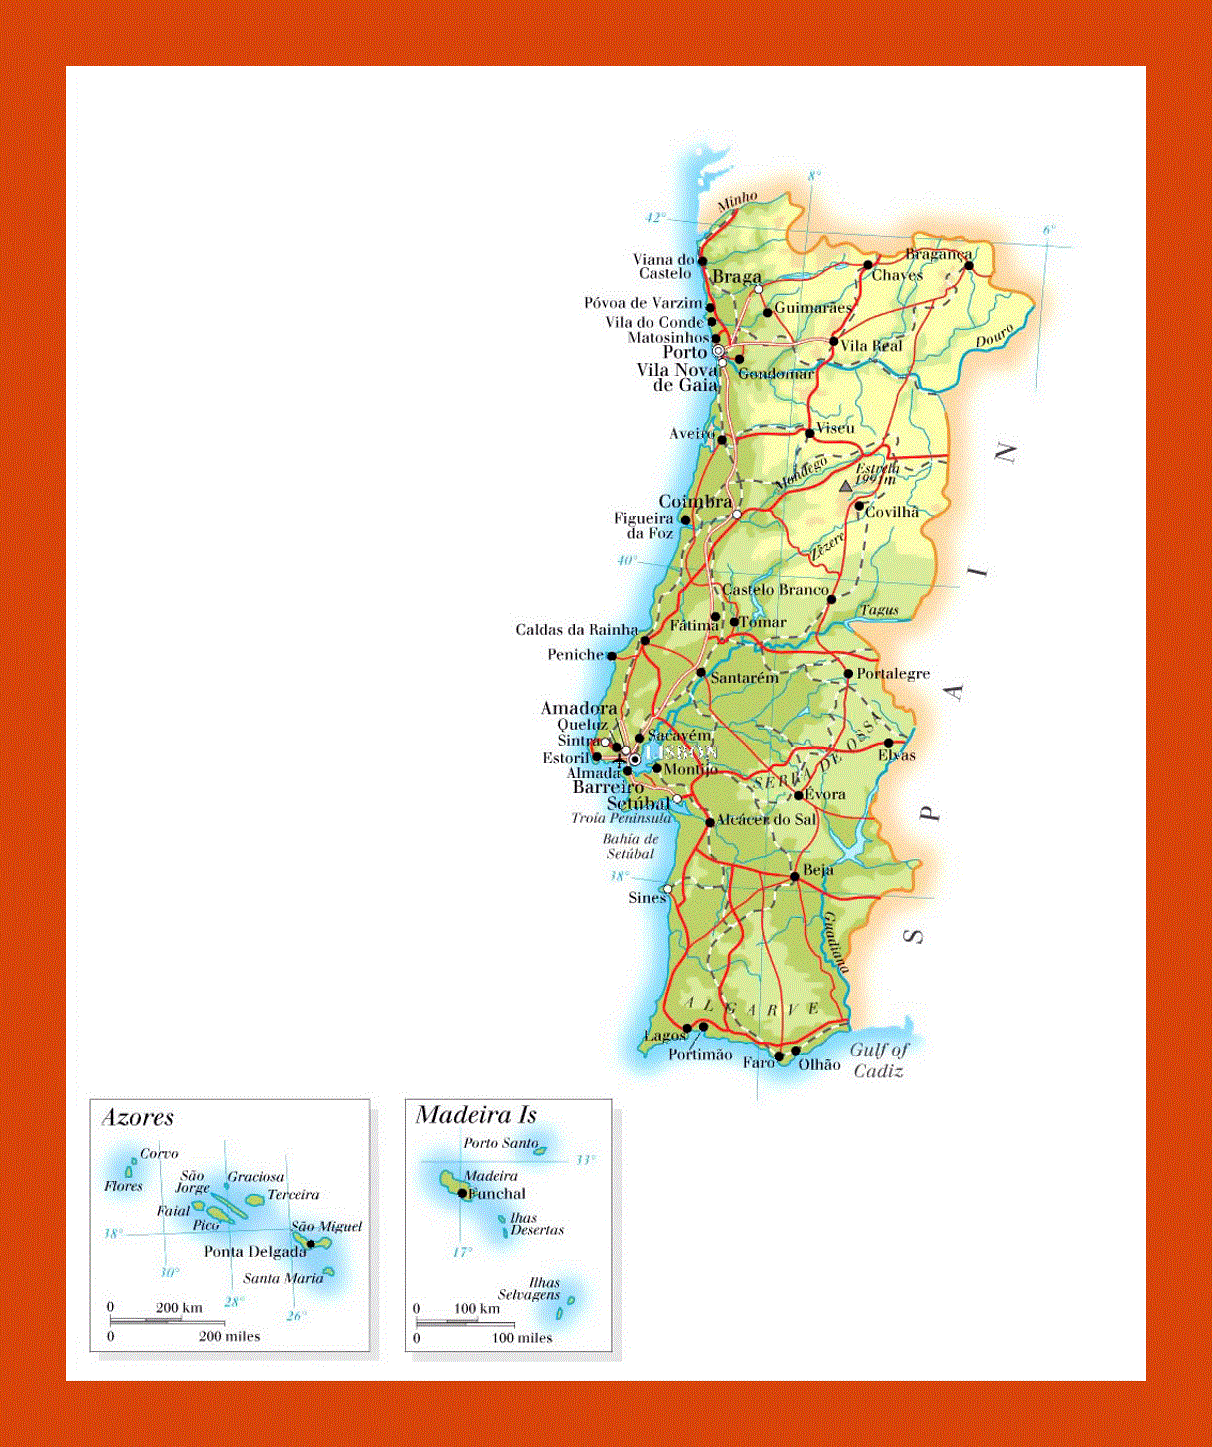 Elevation map of Portugal